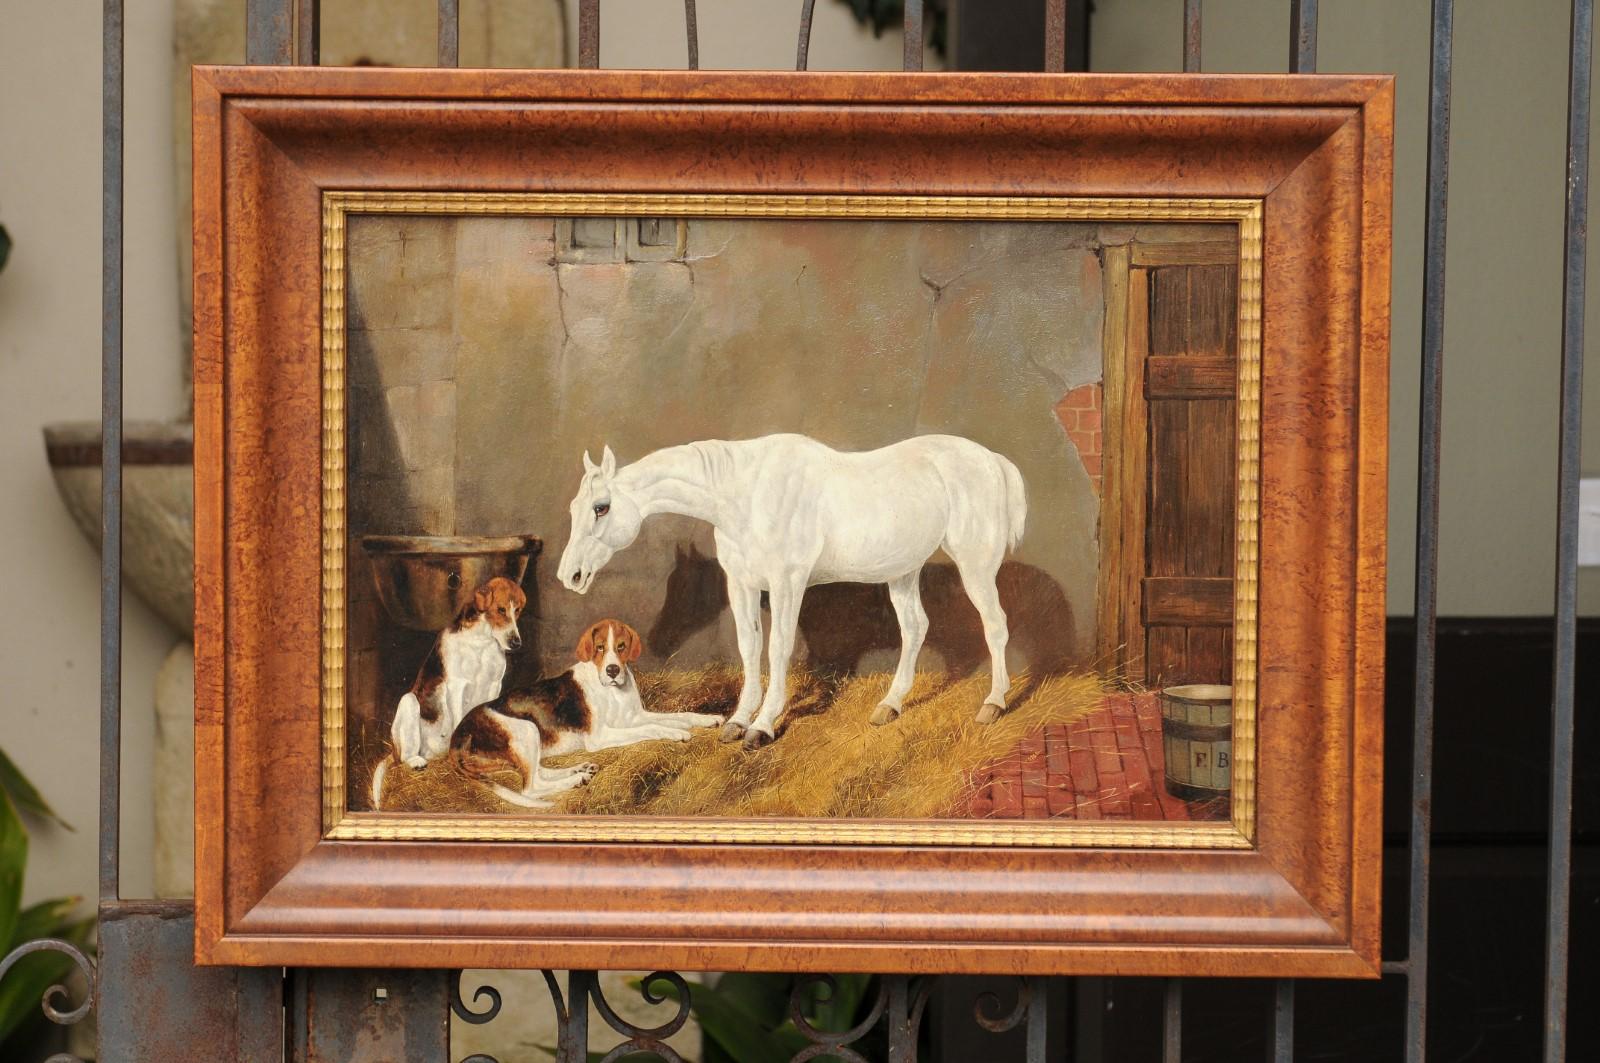  An English barn scene oil painting from the second half of the 19th century, depicting a white horse standing in the front of two hound dogs. This rustic scene strikes immediately by the sobriety of its palette mostly made of brown, red and yellow